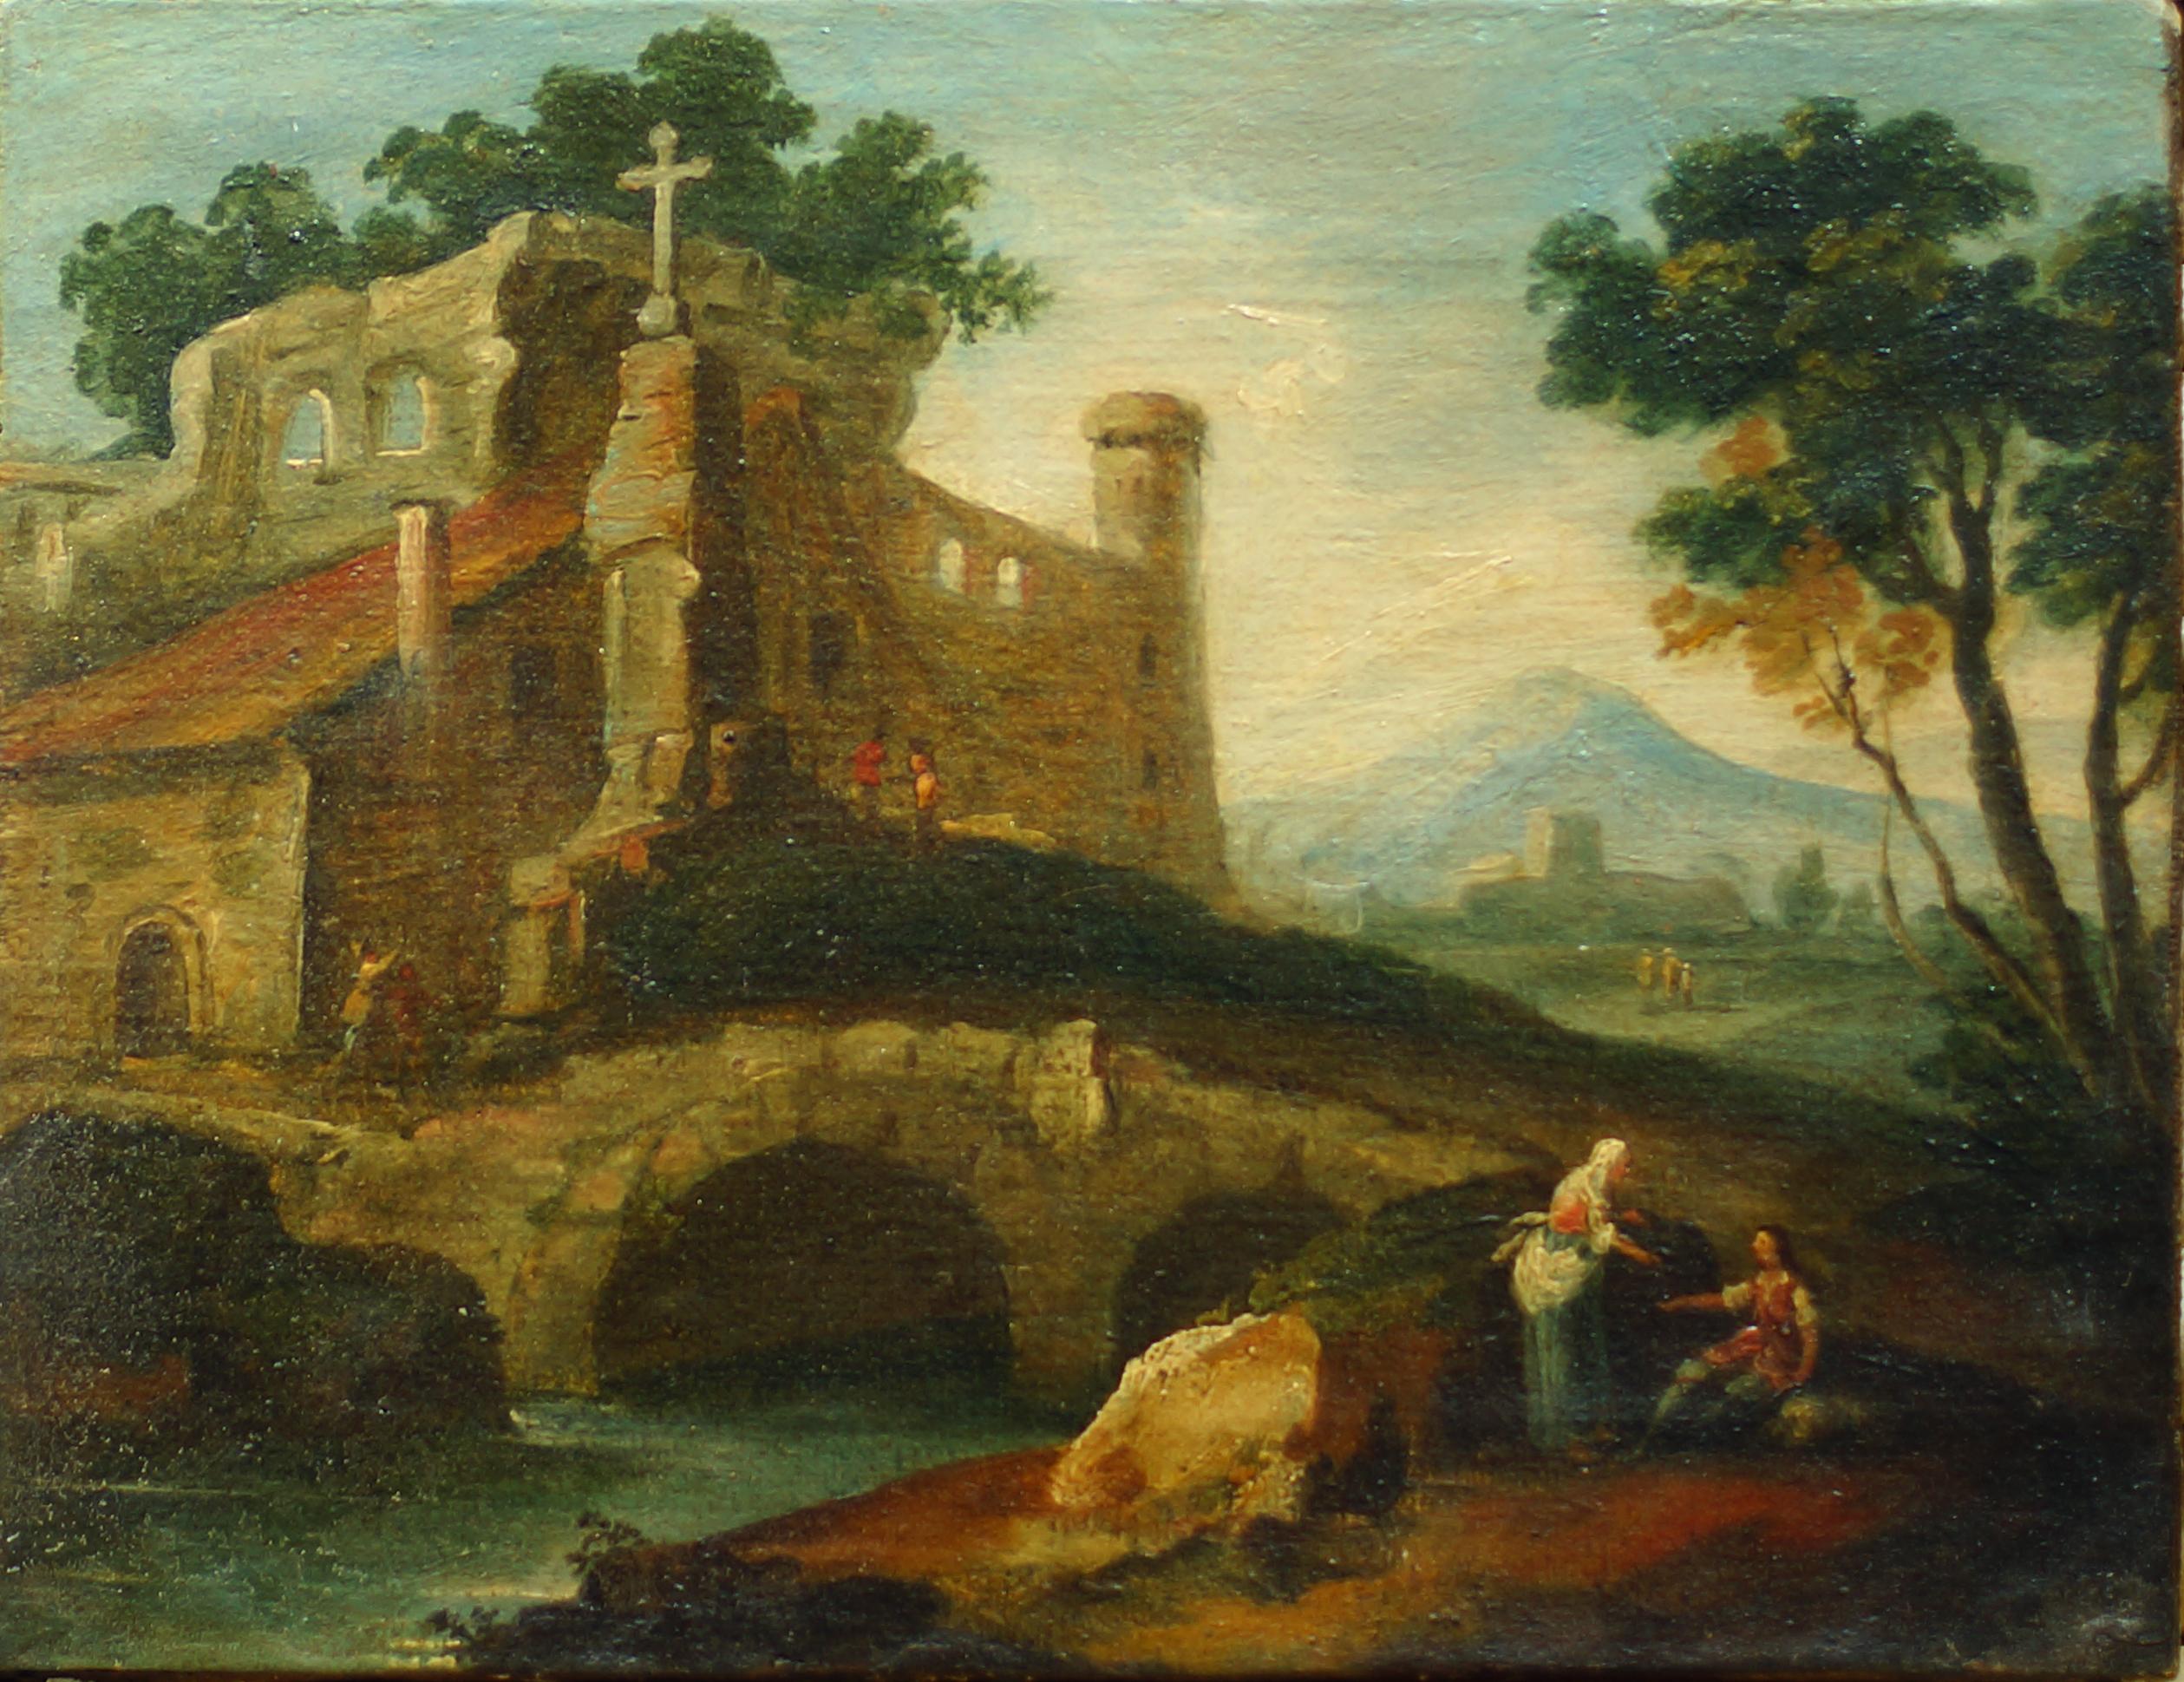 Unknown Figurative Painting - Fluvial Landscape with Bystanders - Italian School of Venice - 18th century